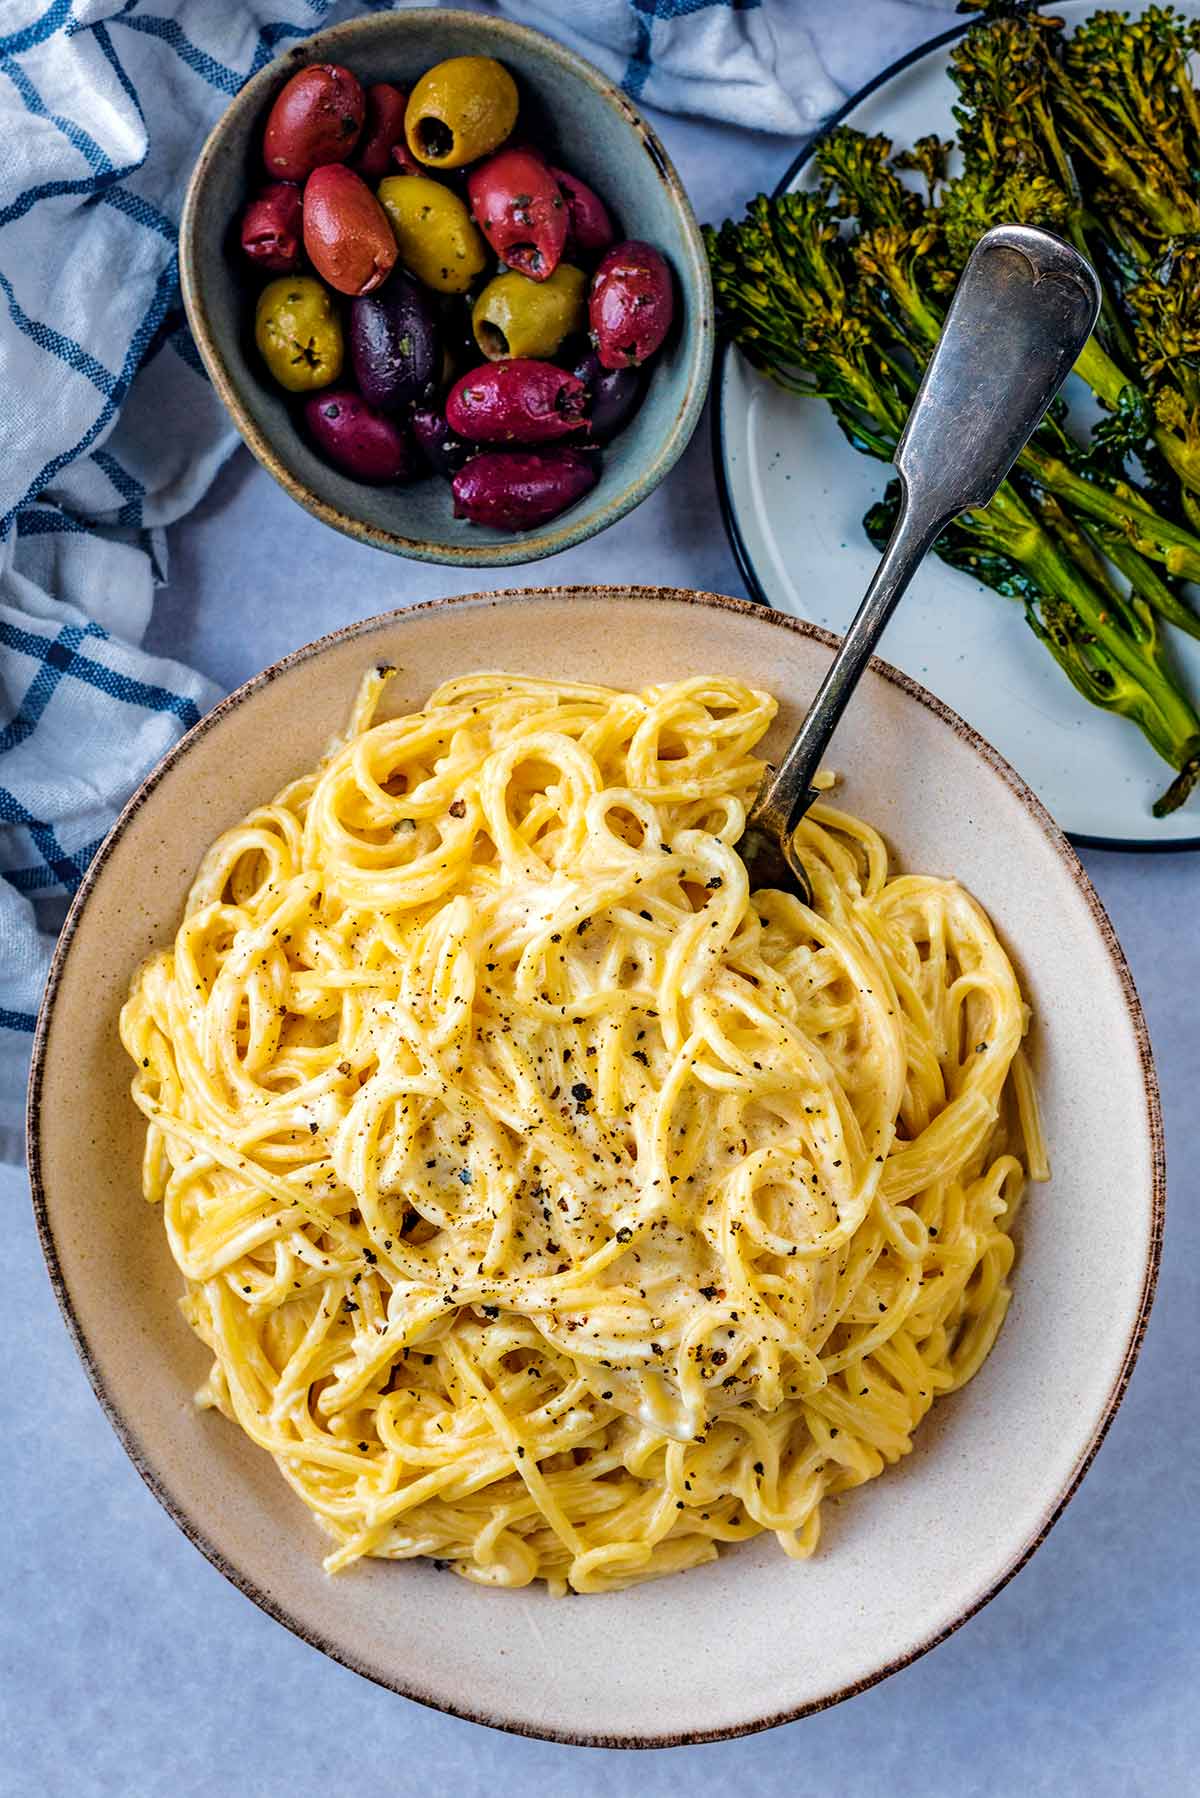 A large bowl of creamy spaghetti next to a bowl of olives and some broccoli.